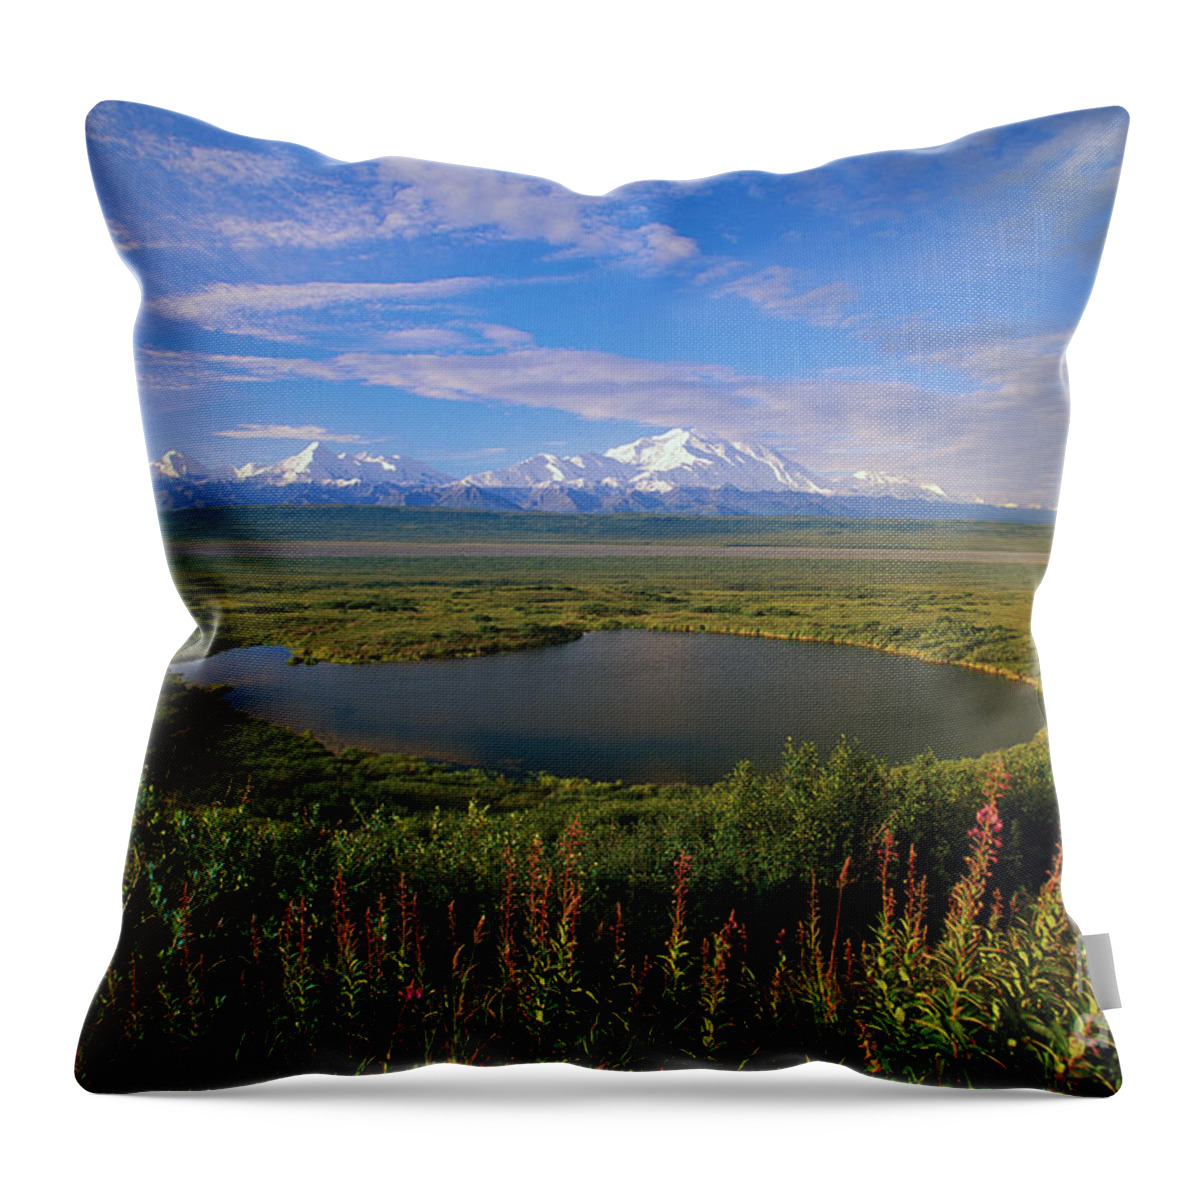 00340579 Throw Pillow featuring the photograph Glacial Kettle Pond And Denali by Yva Momatiuk John Eastcott